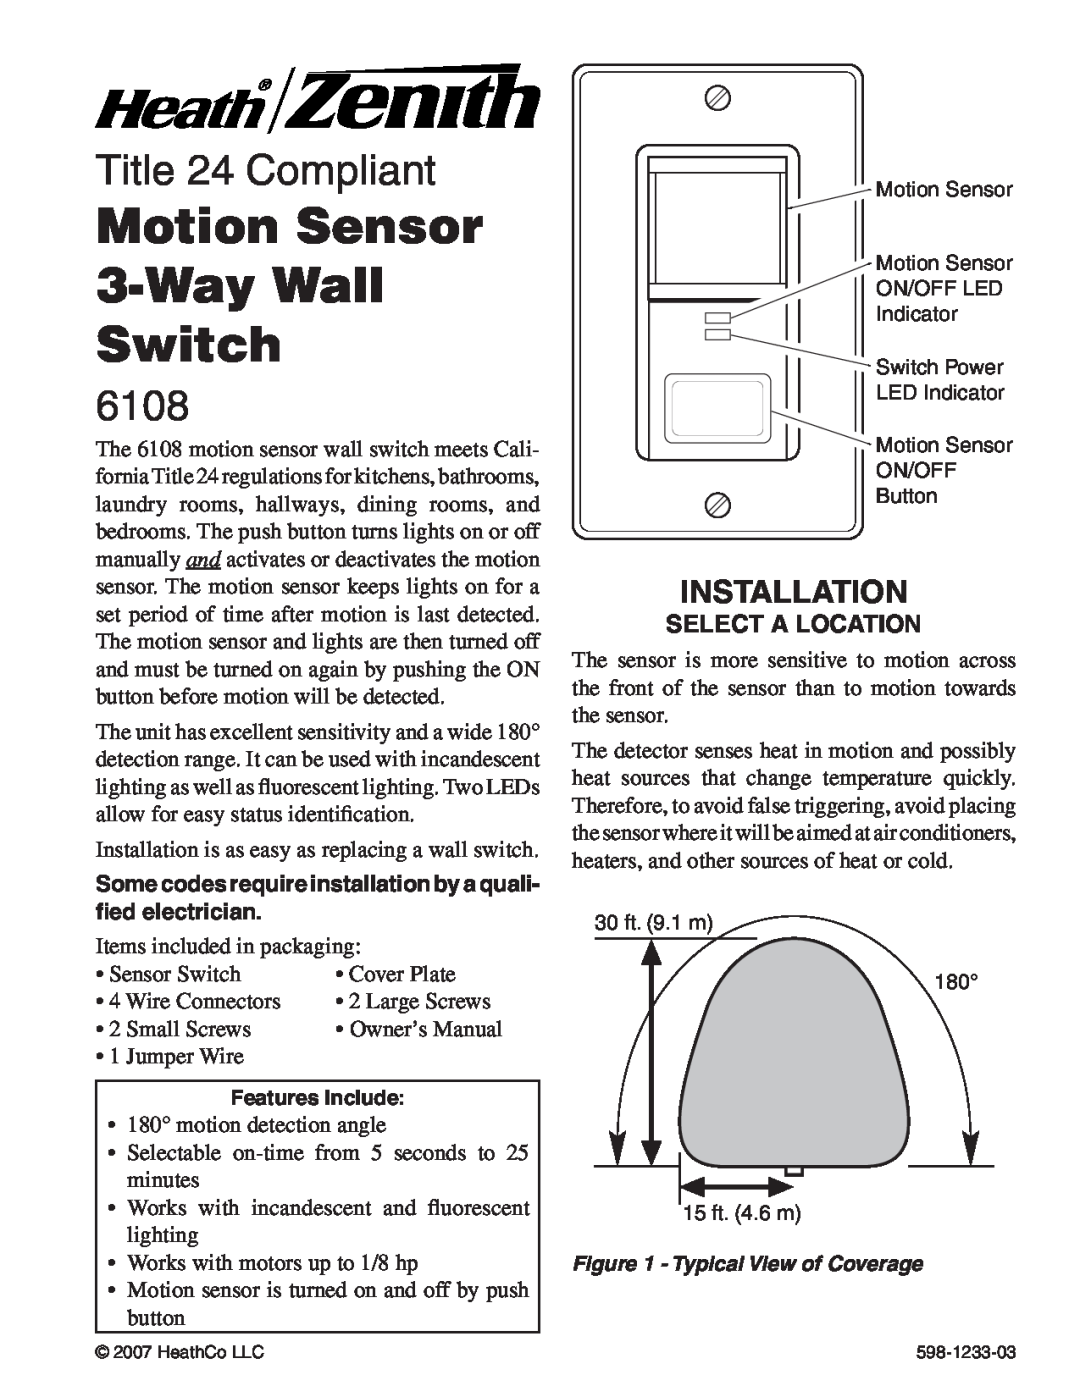 Heath Zenith 6108 owner manual Title 24 Compliant, Motion Sensor 3-WayWall Switch, Installation, Select A Location 